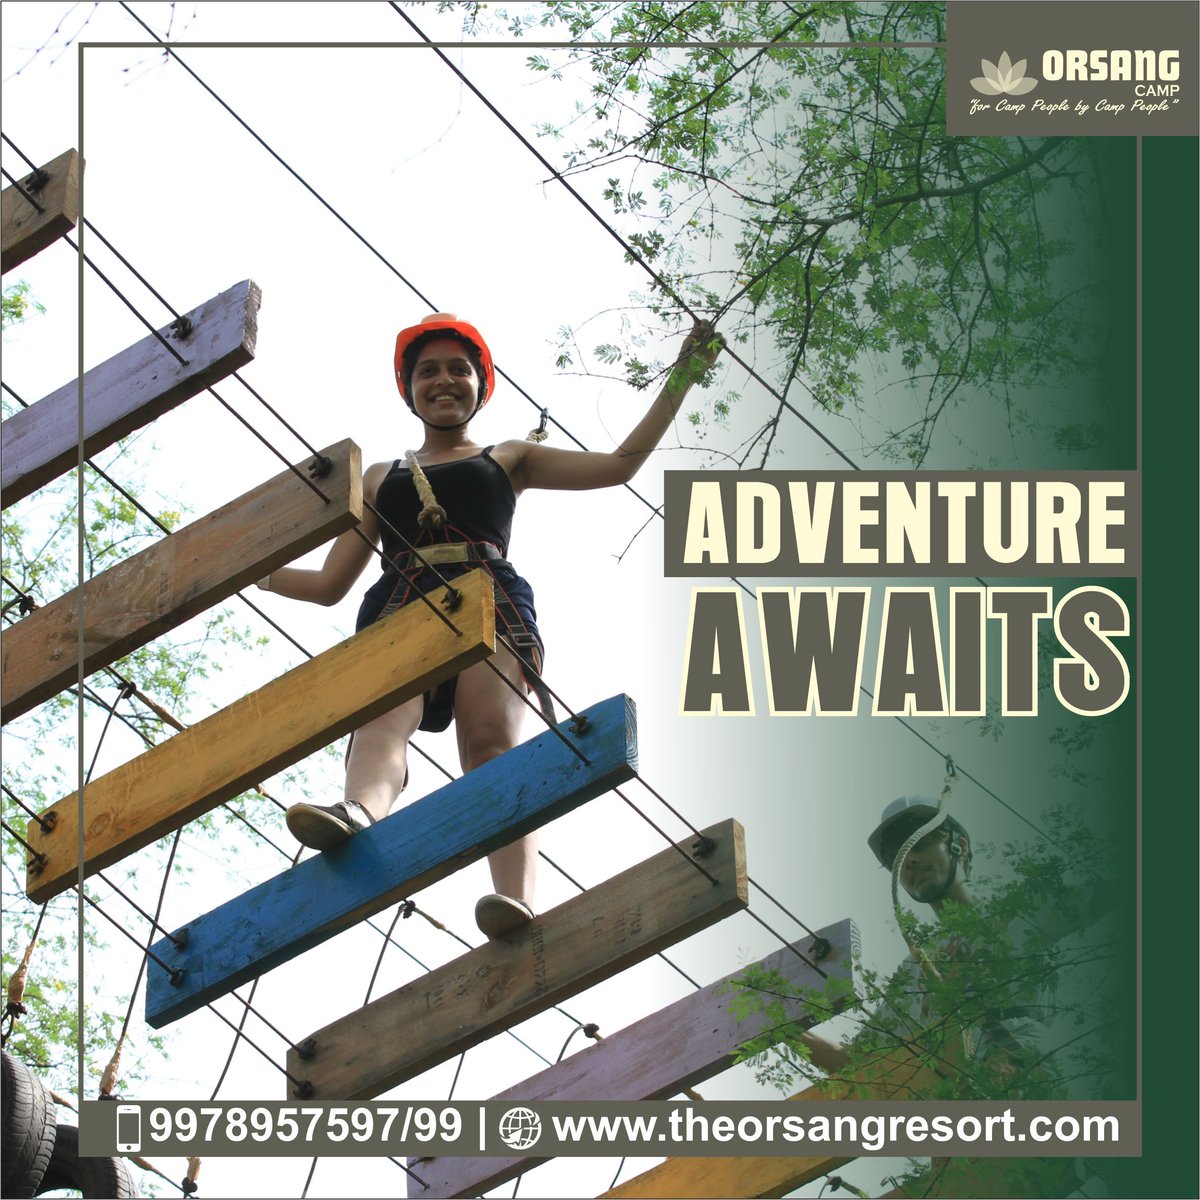 Are looking for some thrilling adventure in this monsoon. Then you should visit Orsang Camp where you can feel the thrill. 

Website: buff.ly/2HBiPqI  | Phone No. 9978957597
#OrsangCamp #OrsangGroup #EcoTourismCenter #NatureCamping #Monsoon #Greenery  #SpecialOffer